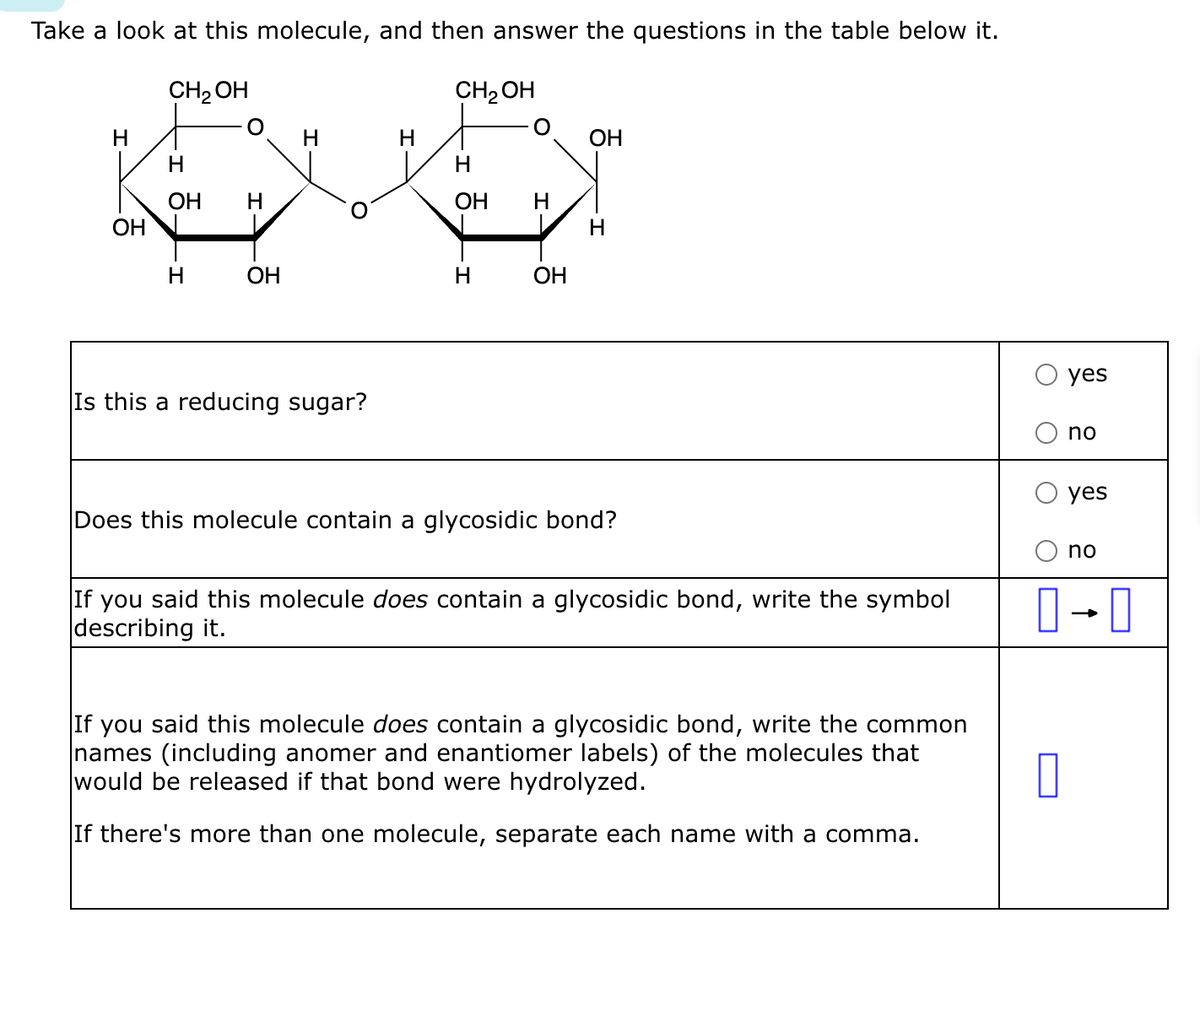 Take a look at this molecule, and then answer the questions in the table below it.
CH₂OH
H
OH
H
OH
H
H
OH
H
Is this a reducing sugar?
H
CH₂OH
OH
H
H
OH
OH
H
Does this molecule contain a glycosidic bond?
If you said this molecule does contain a glycosidic bond, write the symbol
describing it.
If you said this molecule does contain a glycosidic bond, write the common
names (including anomer and enantiomer labels) of the molecules that
would be released if that bond were hydrolyzed.
If there's more than one molecule, separate each name with a comma.
yes
0
no
yes
no
0-0